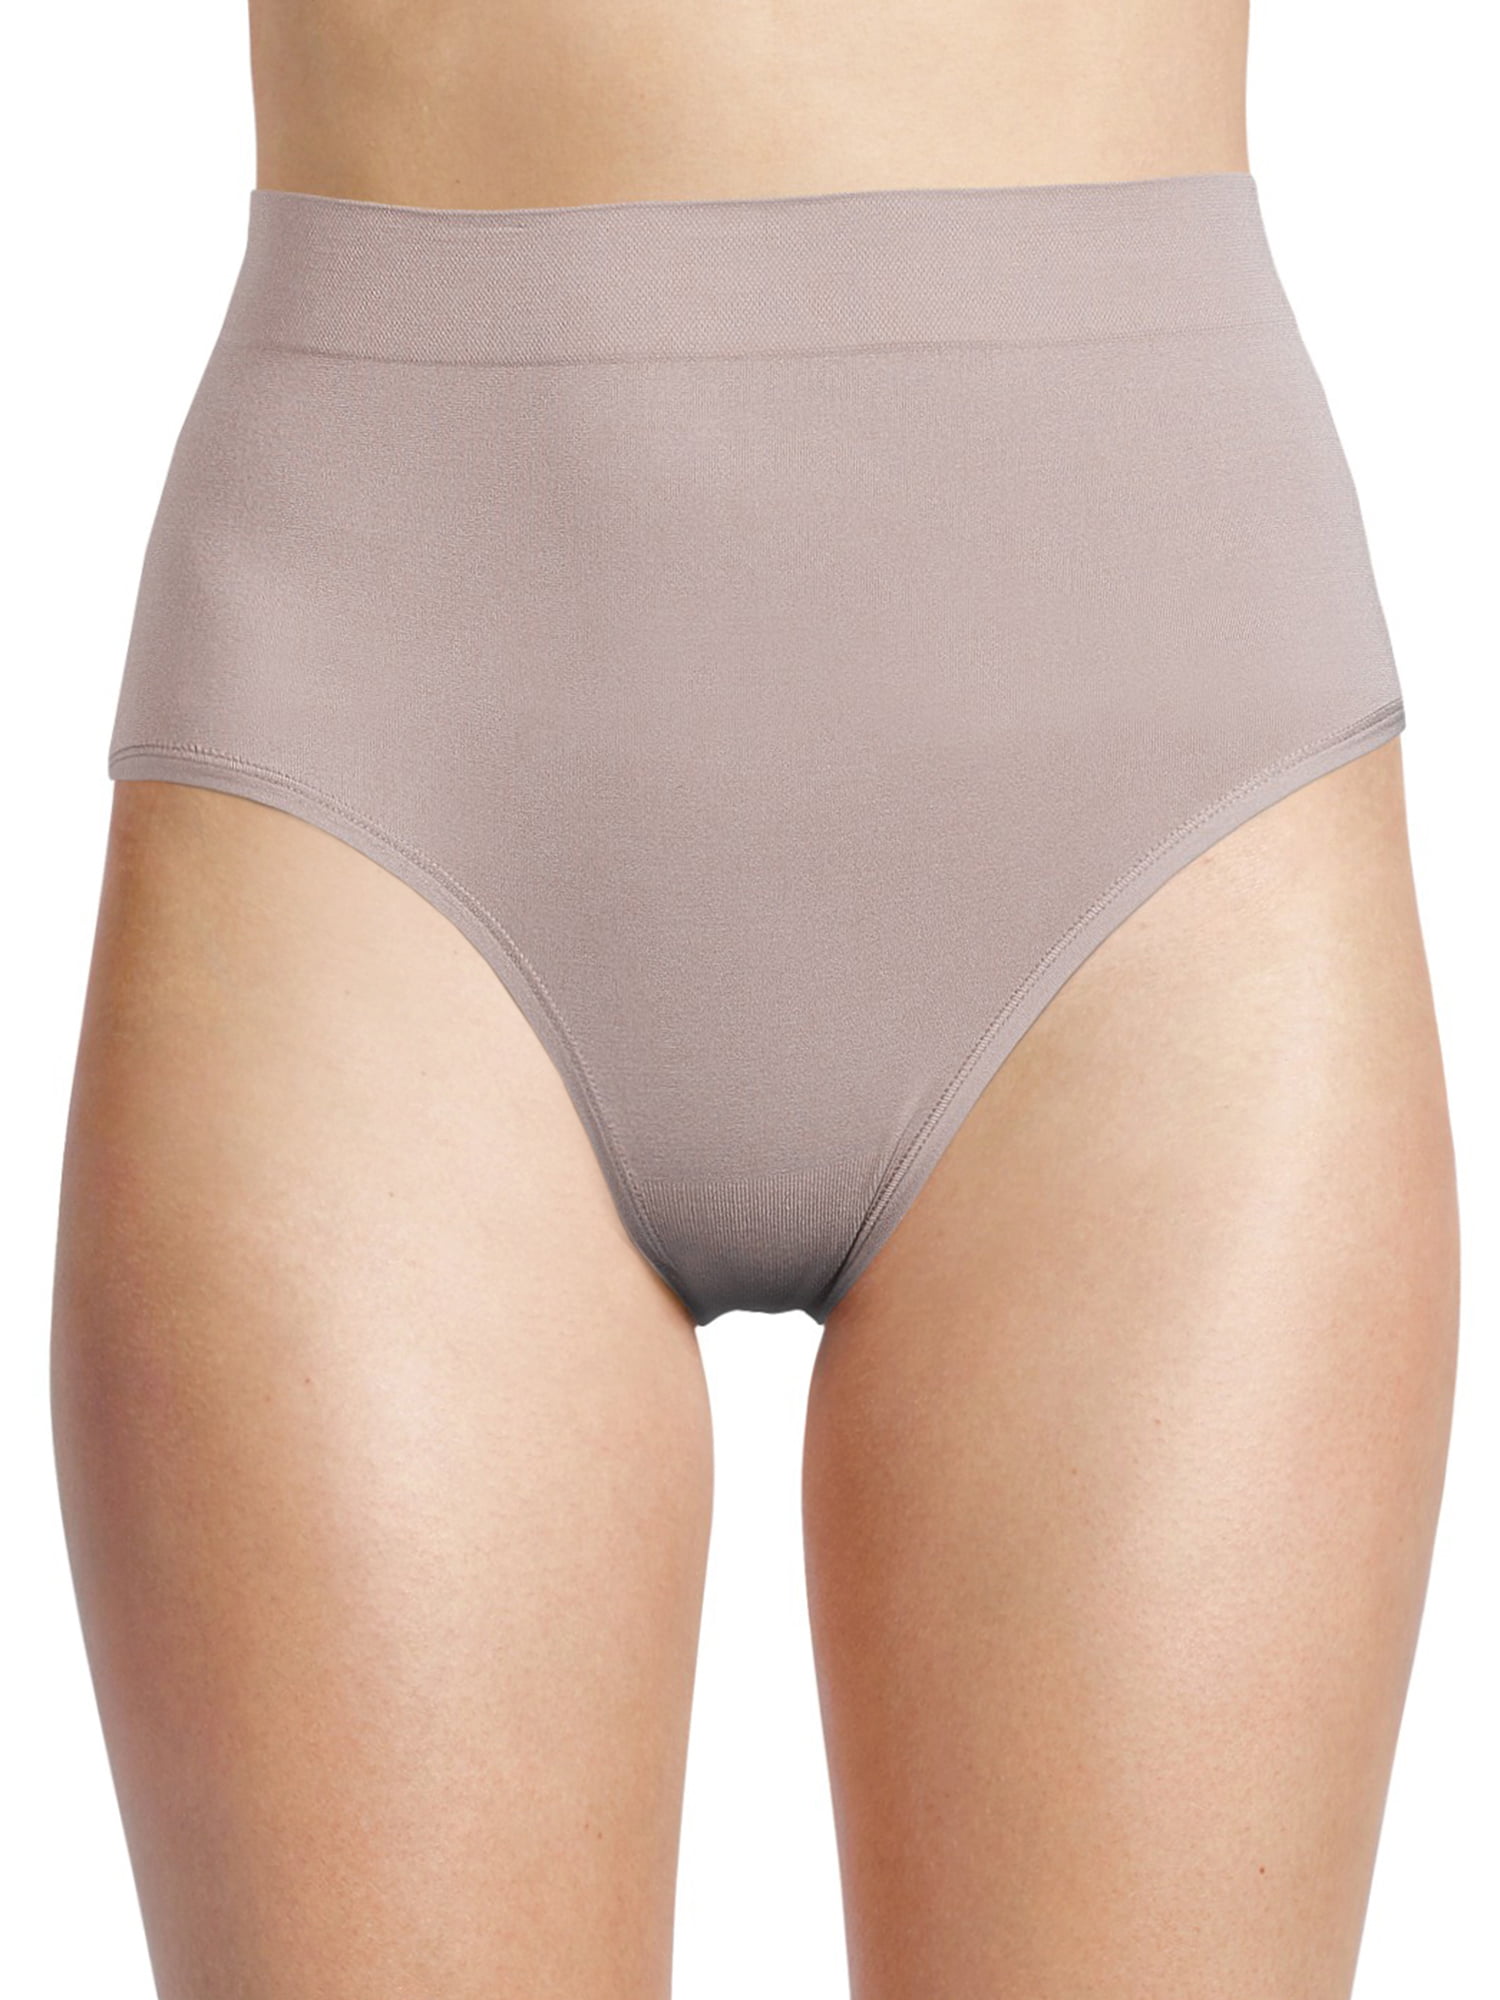 Seamless Underwear for sale in Mountain View, California